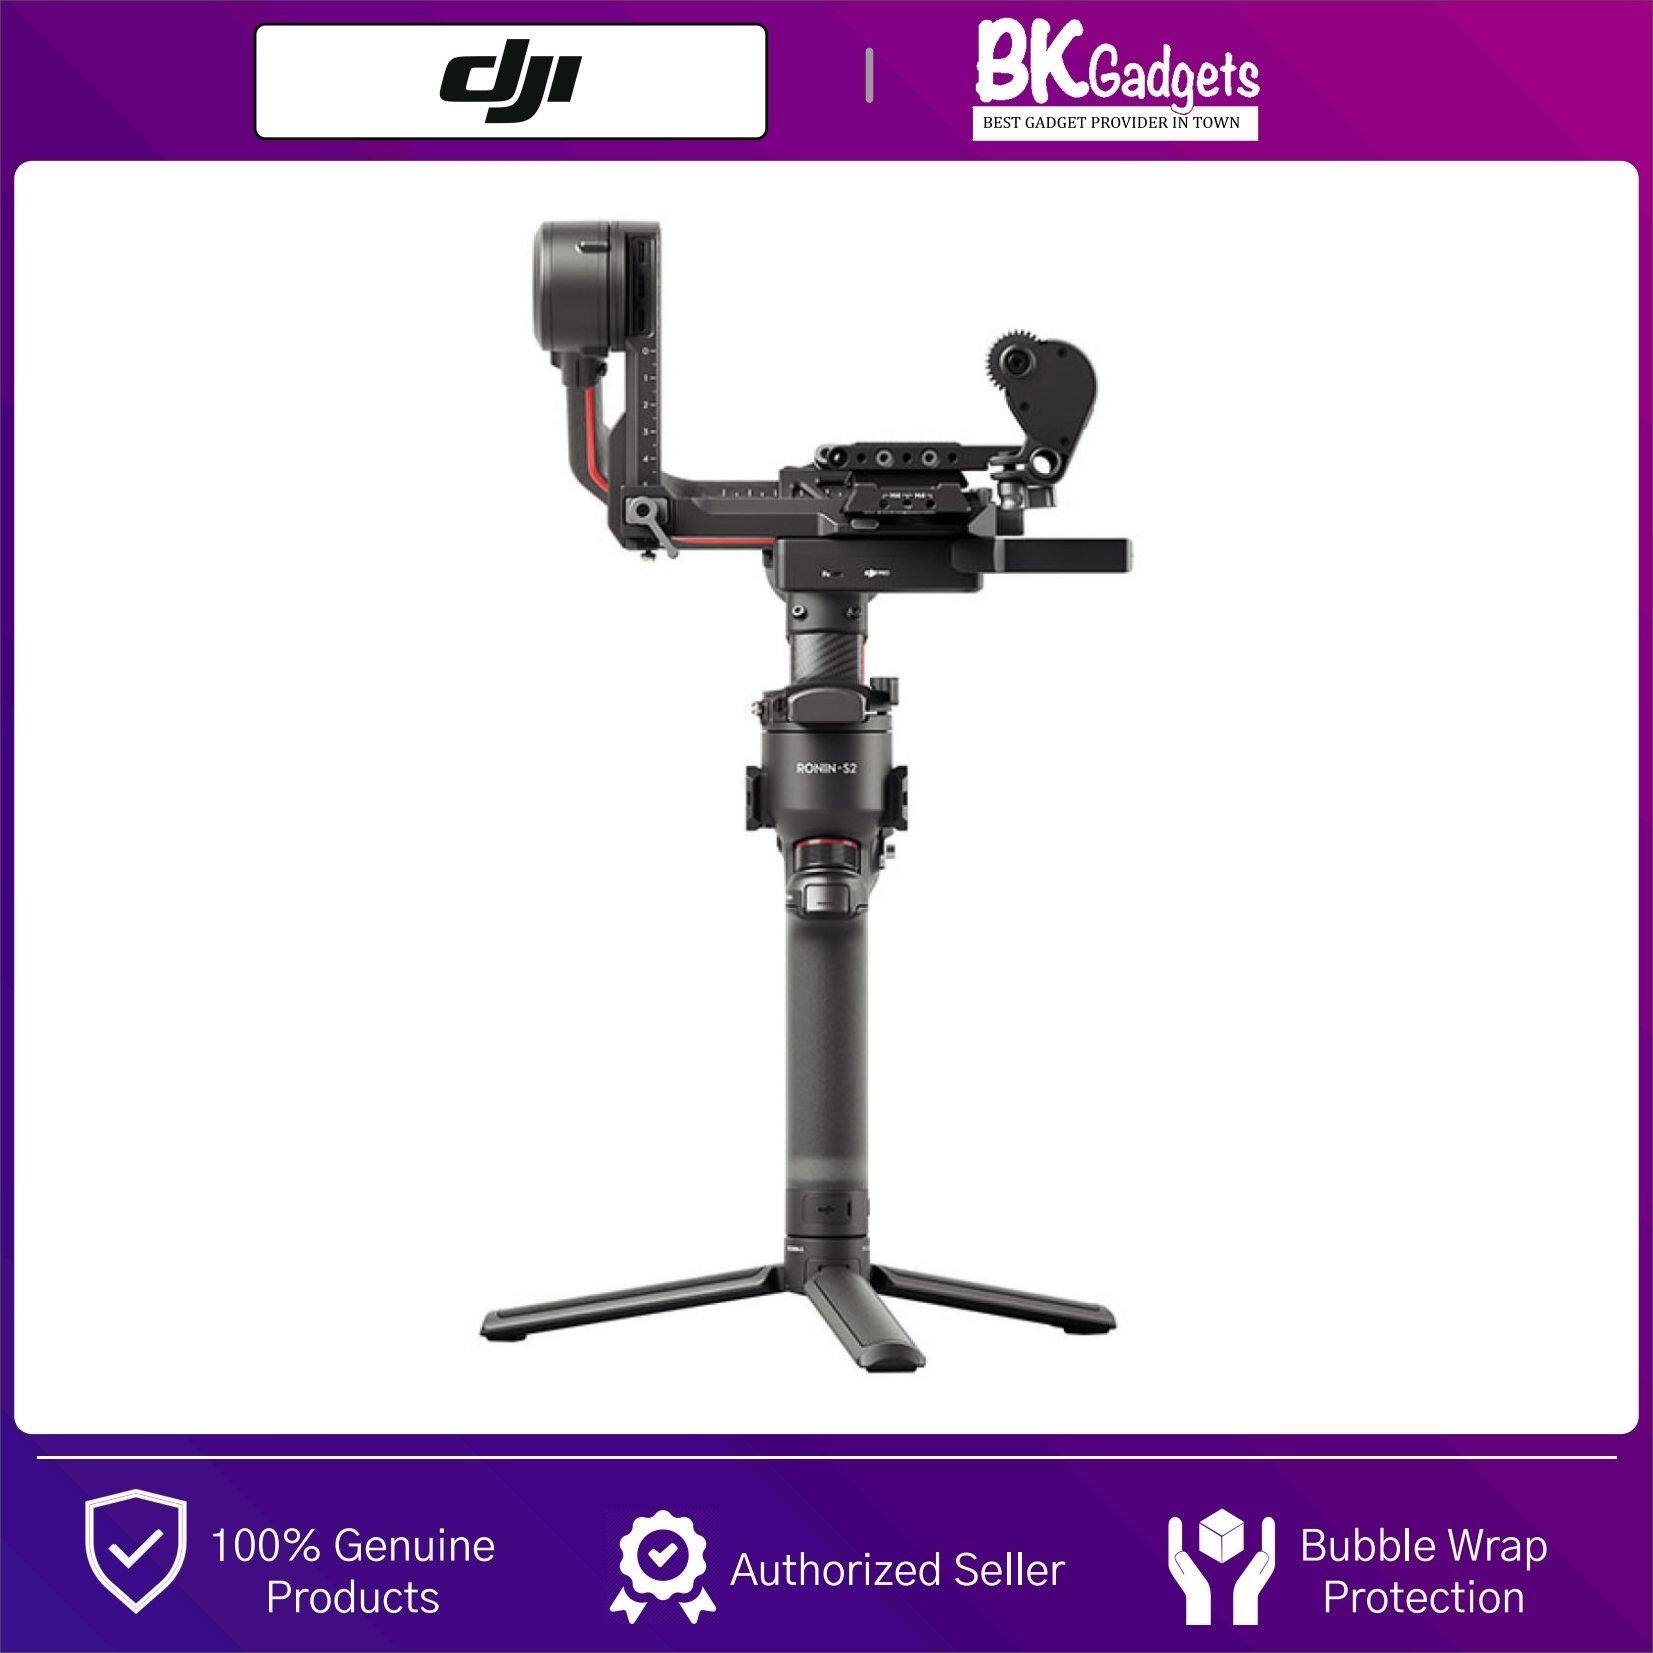 DJI RS 2 - Carbon Fiber Construction | Full-color Touchscreen | Efficient Balancing Between Payloads | Superior Stabilization